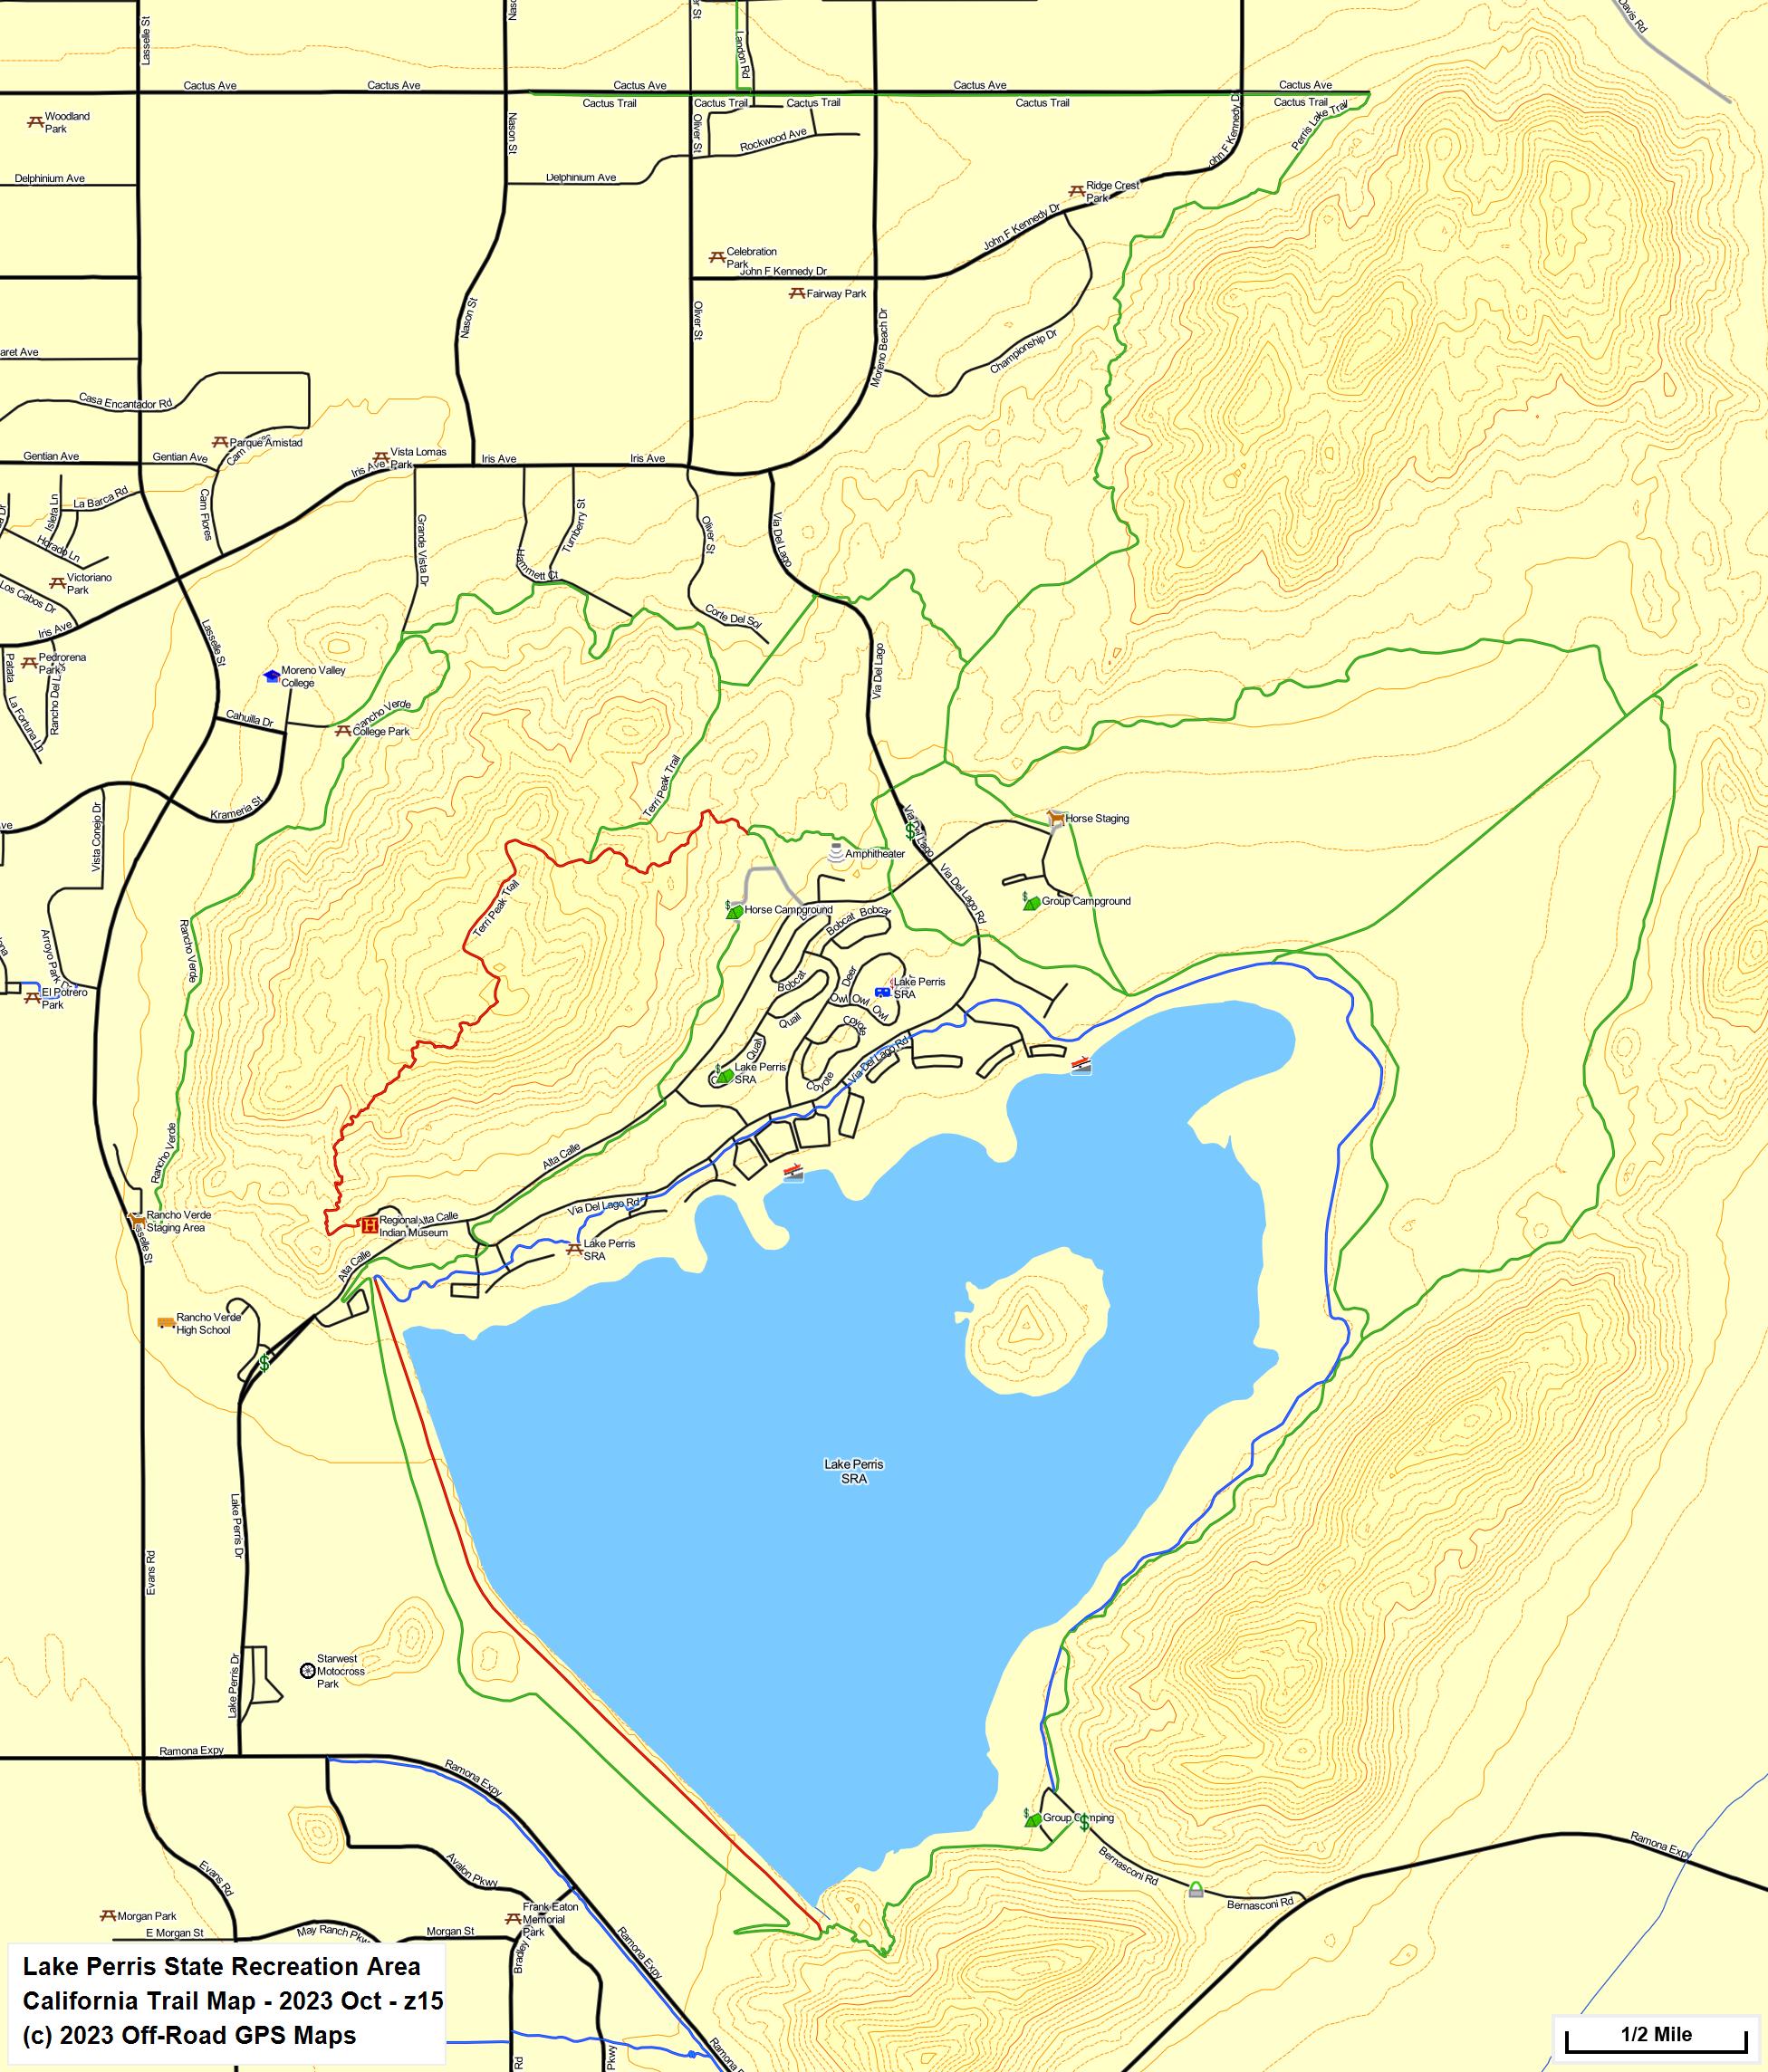 Lake Perris State Recreation Area z 15